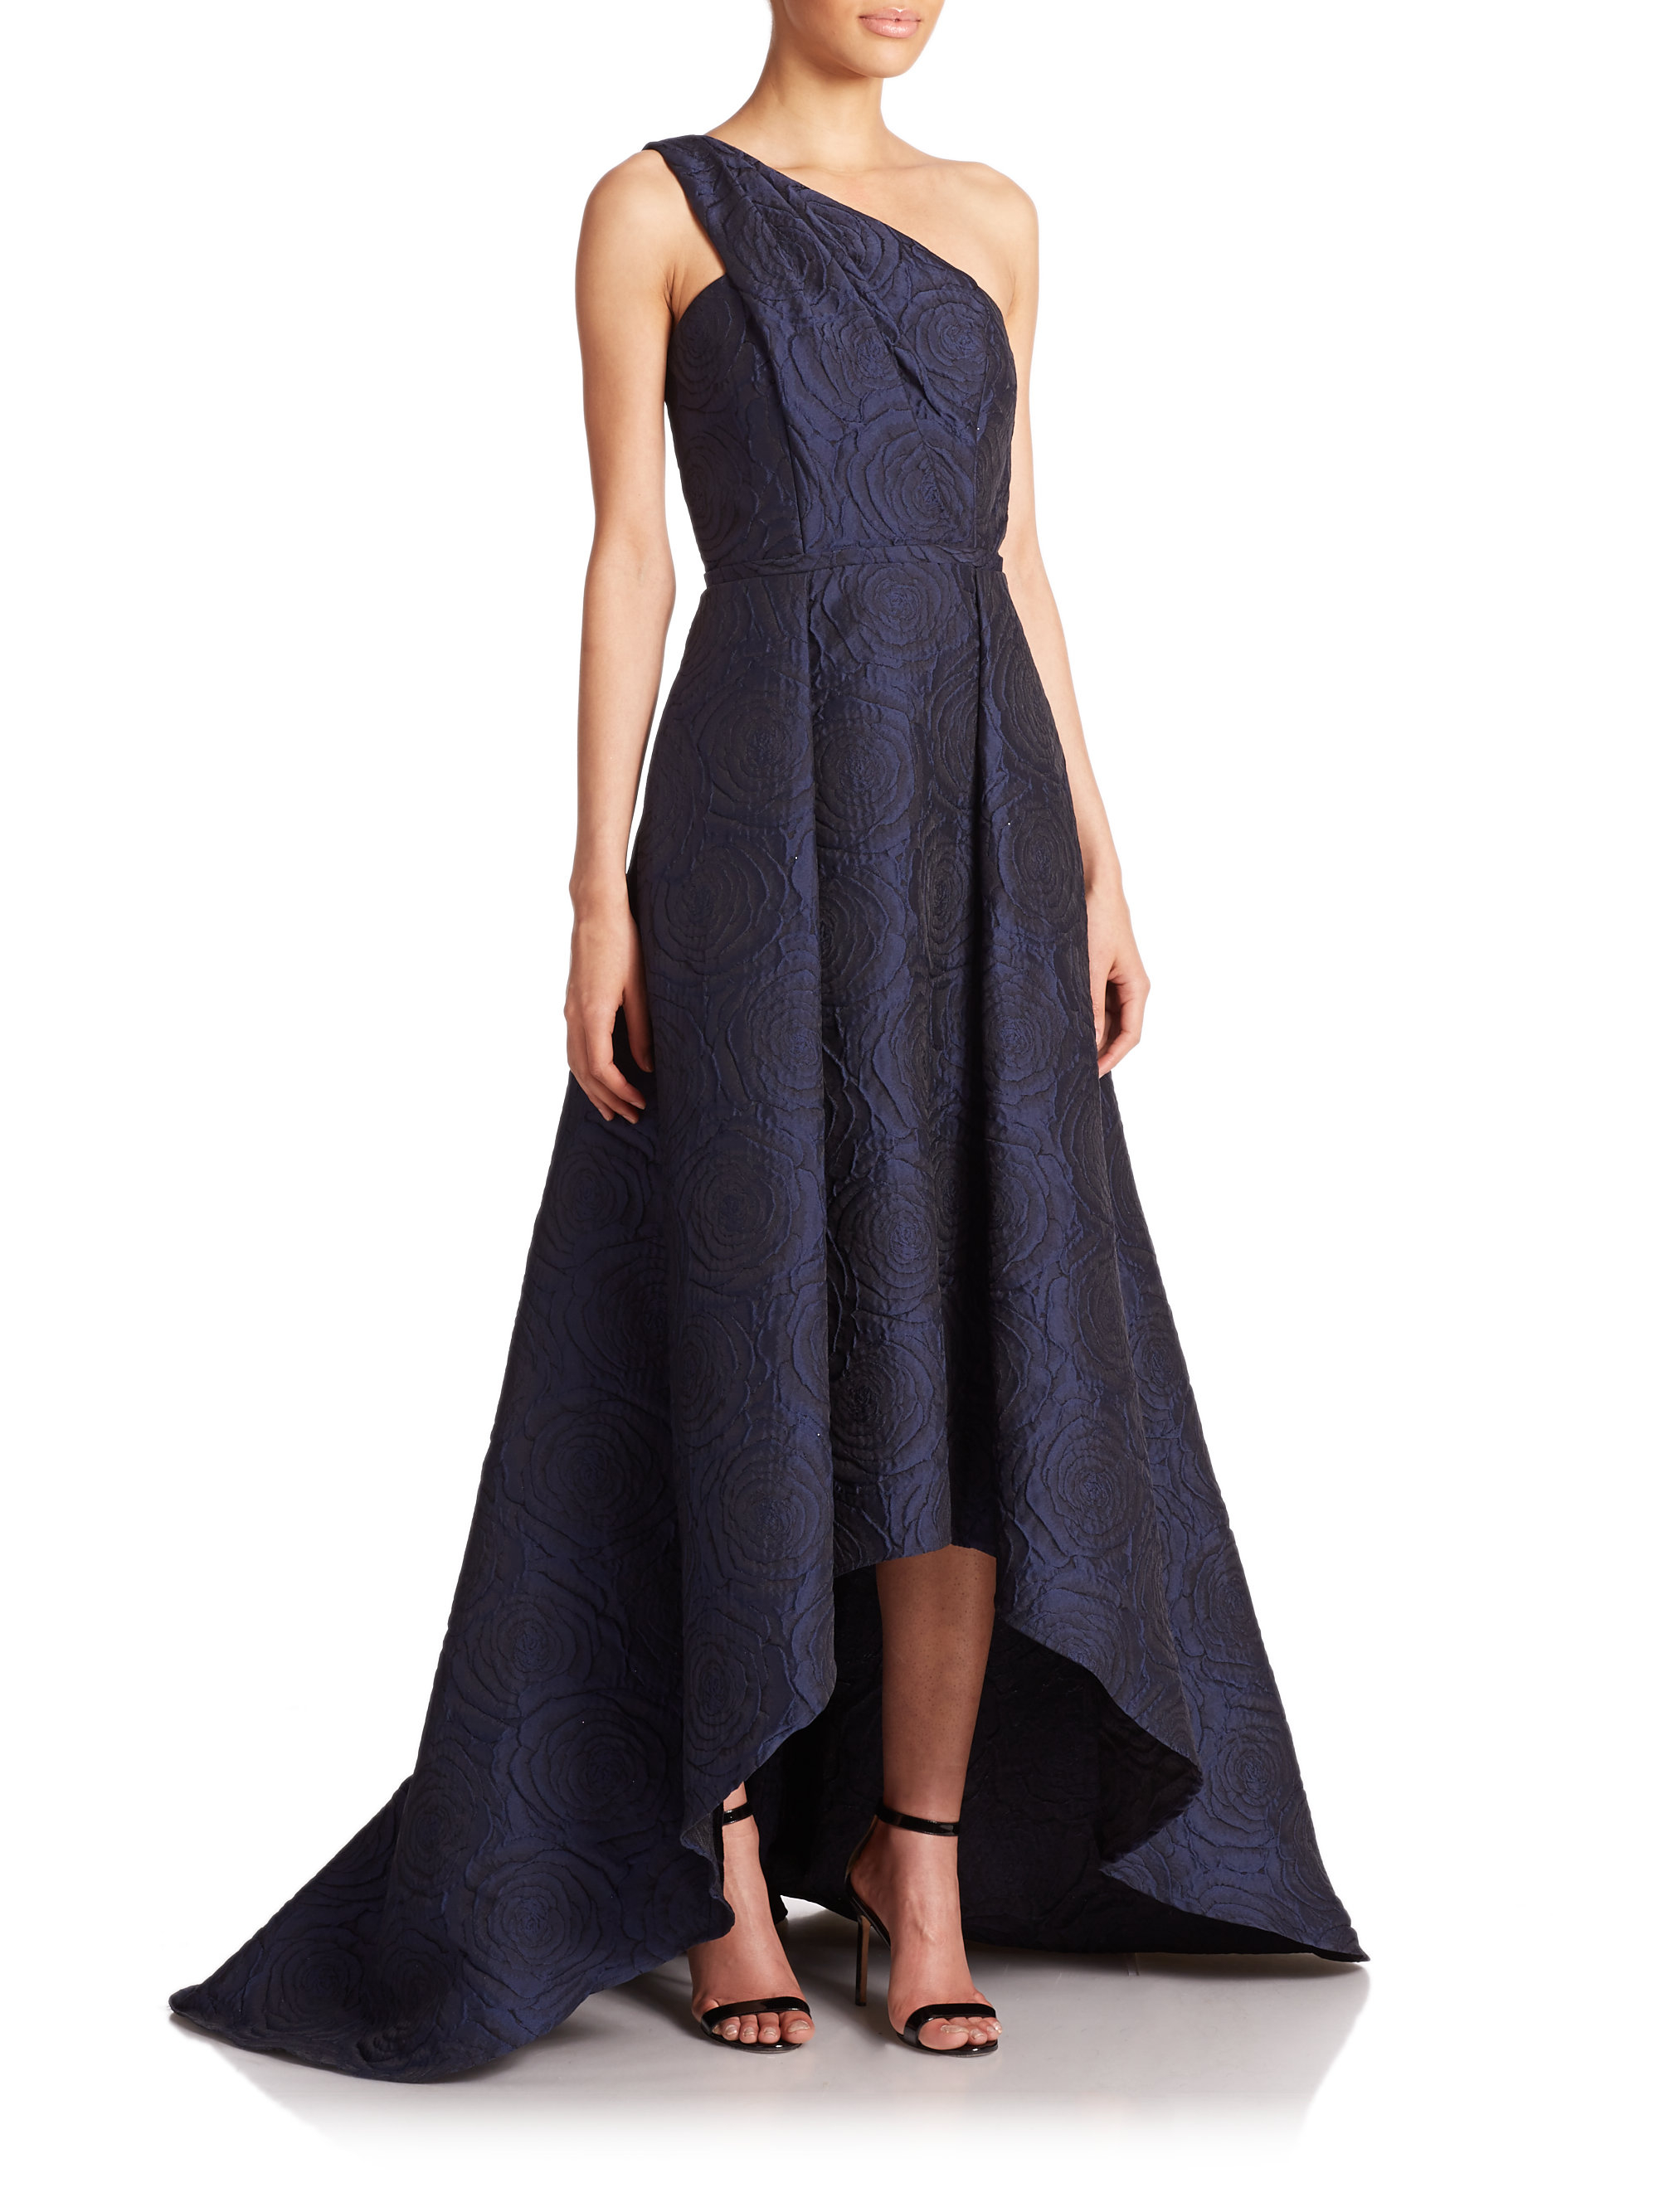 Pamella Roland One-shoulder Jacquard Gown in Navy (Blue) - Lyst